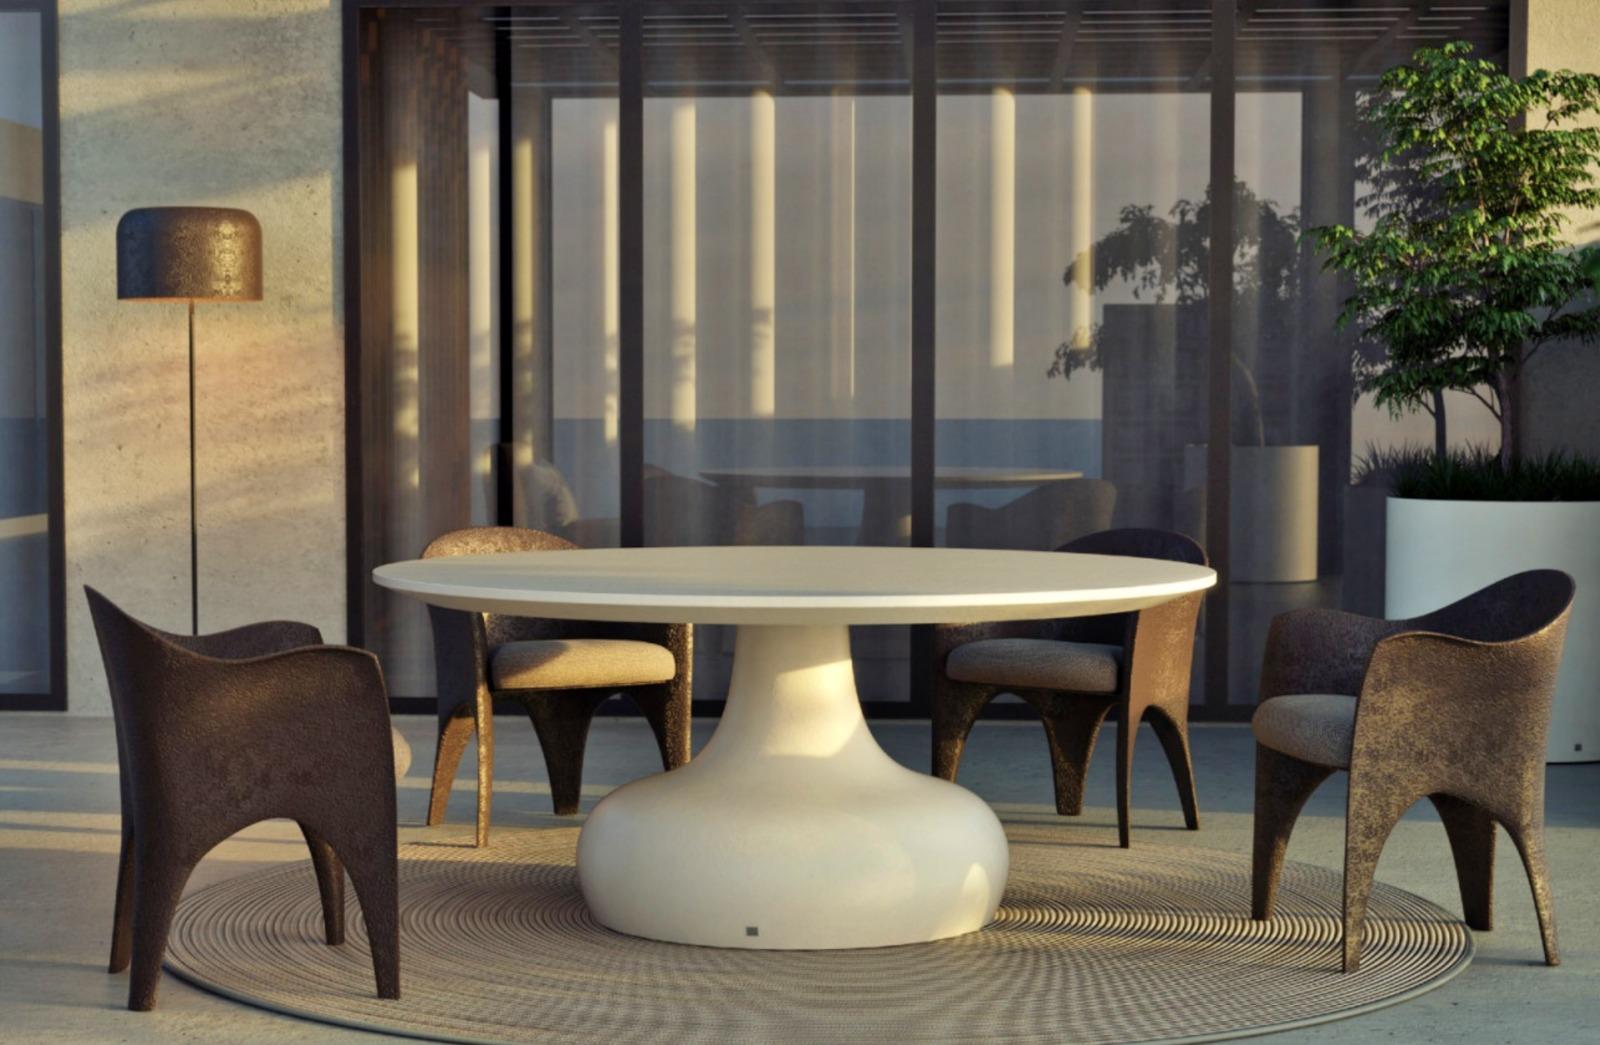 SUMMER 2024

Dining table

General information

Round top, matte white lacquering.
Dimensions
Ø160 x 75 cm /
Ø63 x 29.5 in
Weight
110 kg / 242.5 lbs
Seats
8

Materials and colors

Structure: Resin reinforced with fiberglass, finished in white matte